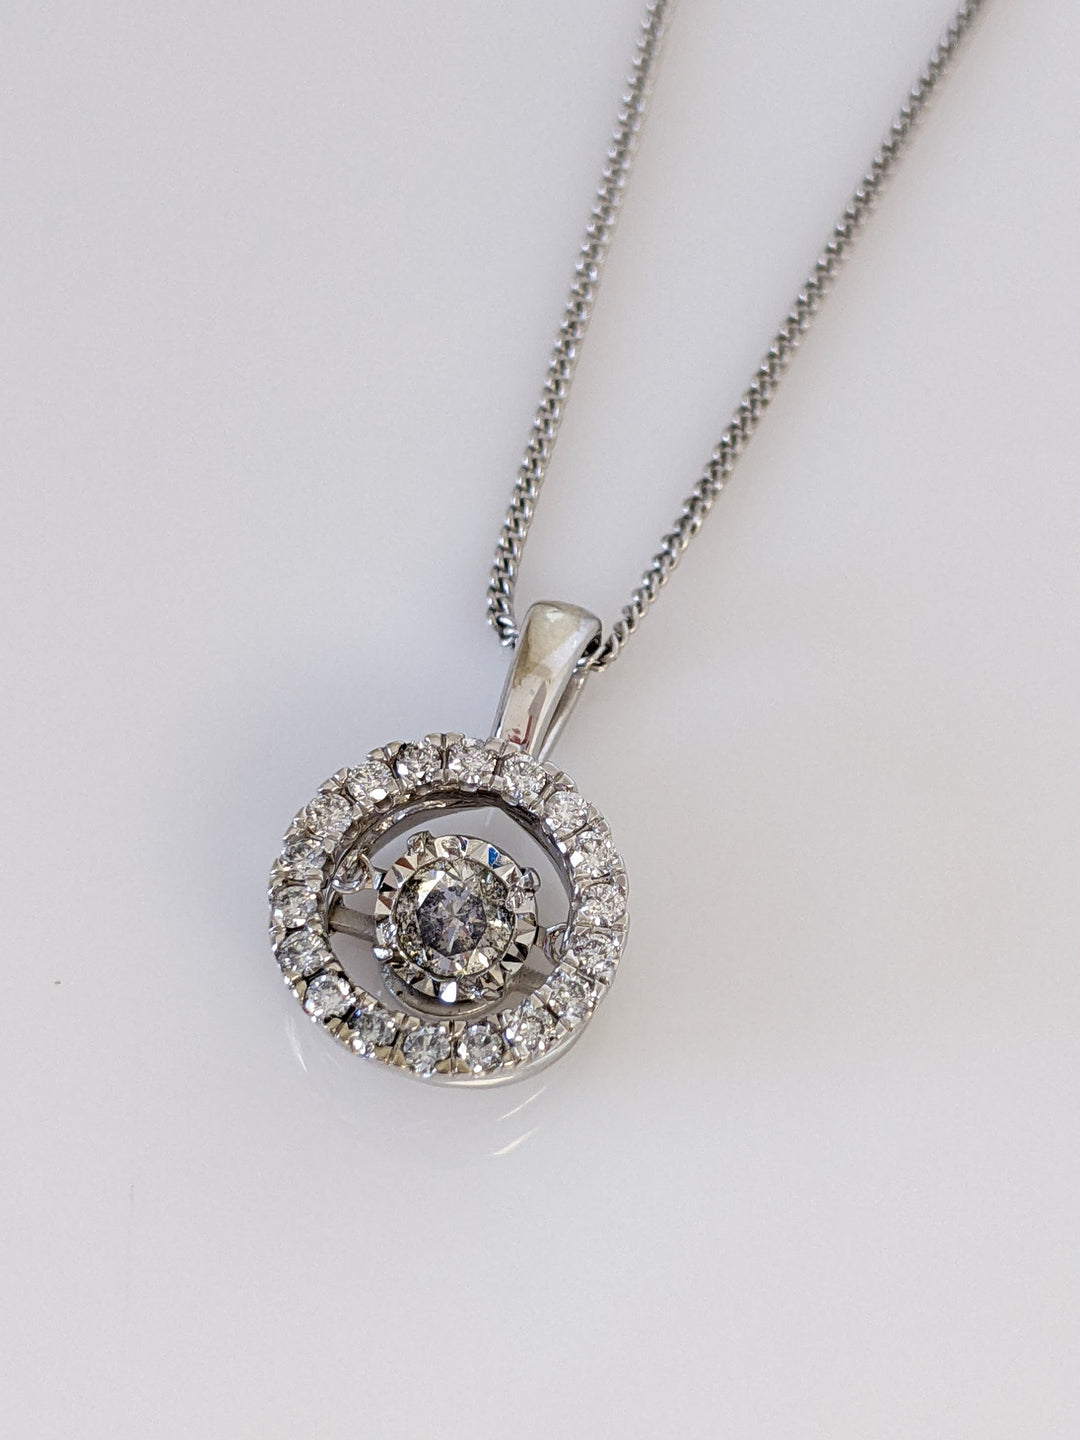 10KW .50 CARAT TOTAL WEIGHT I1 H DIAMOND ROUND (21) HEARTBEAT ESTATE PENDANT AND CHAIN 3.6 GRAMS